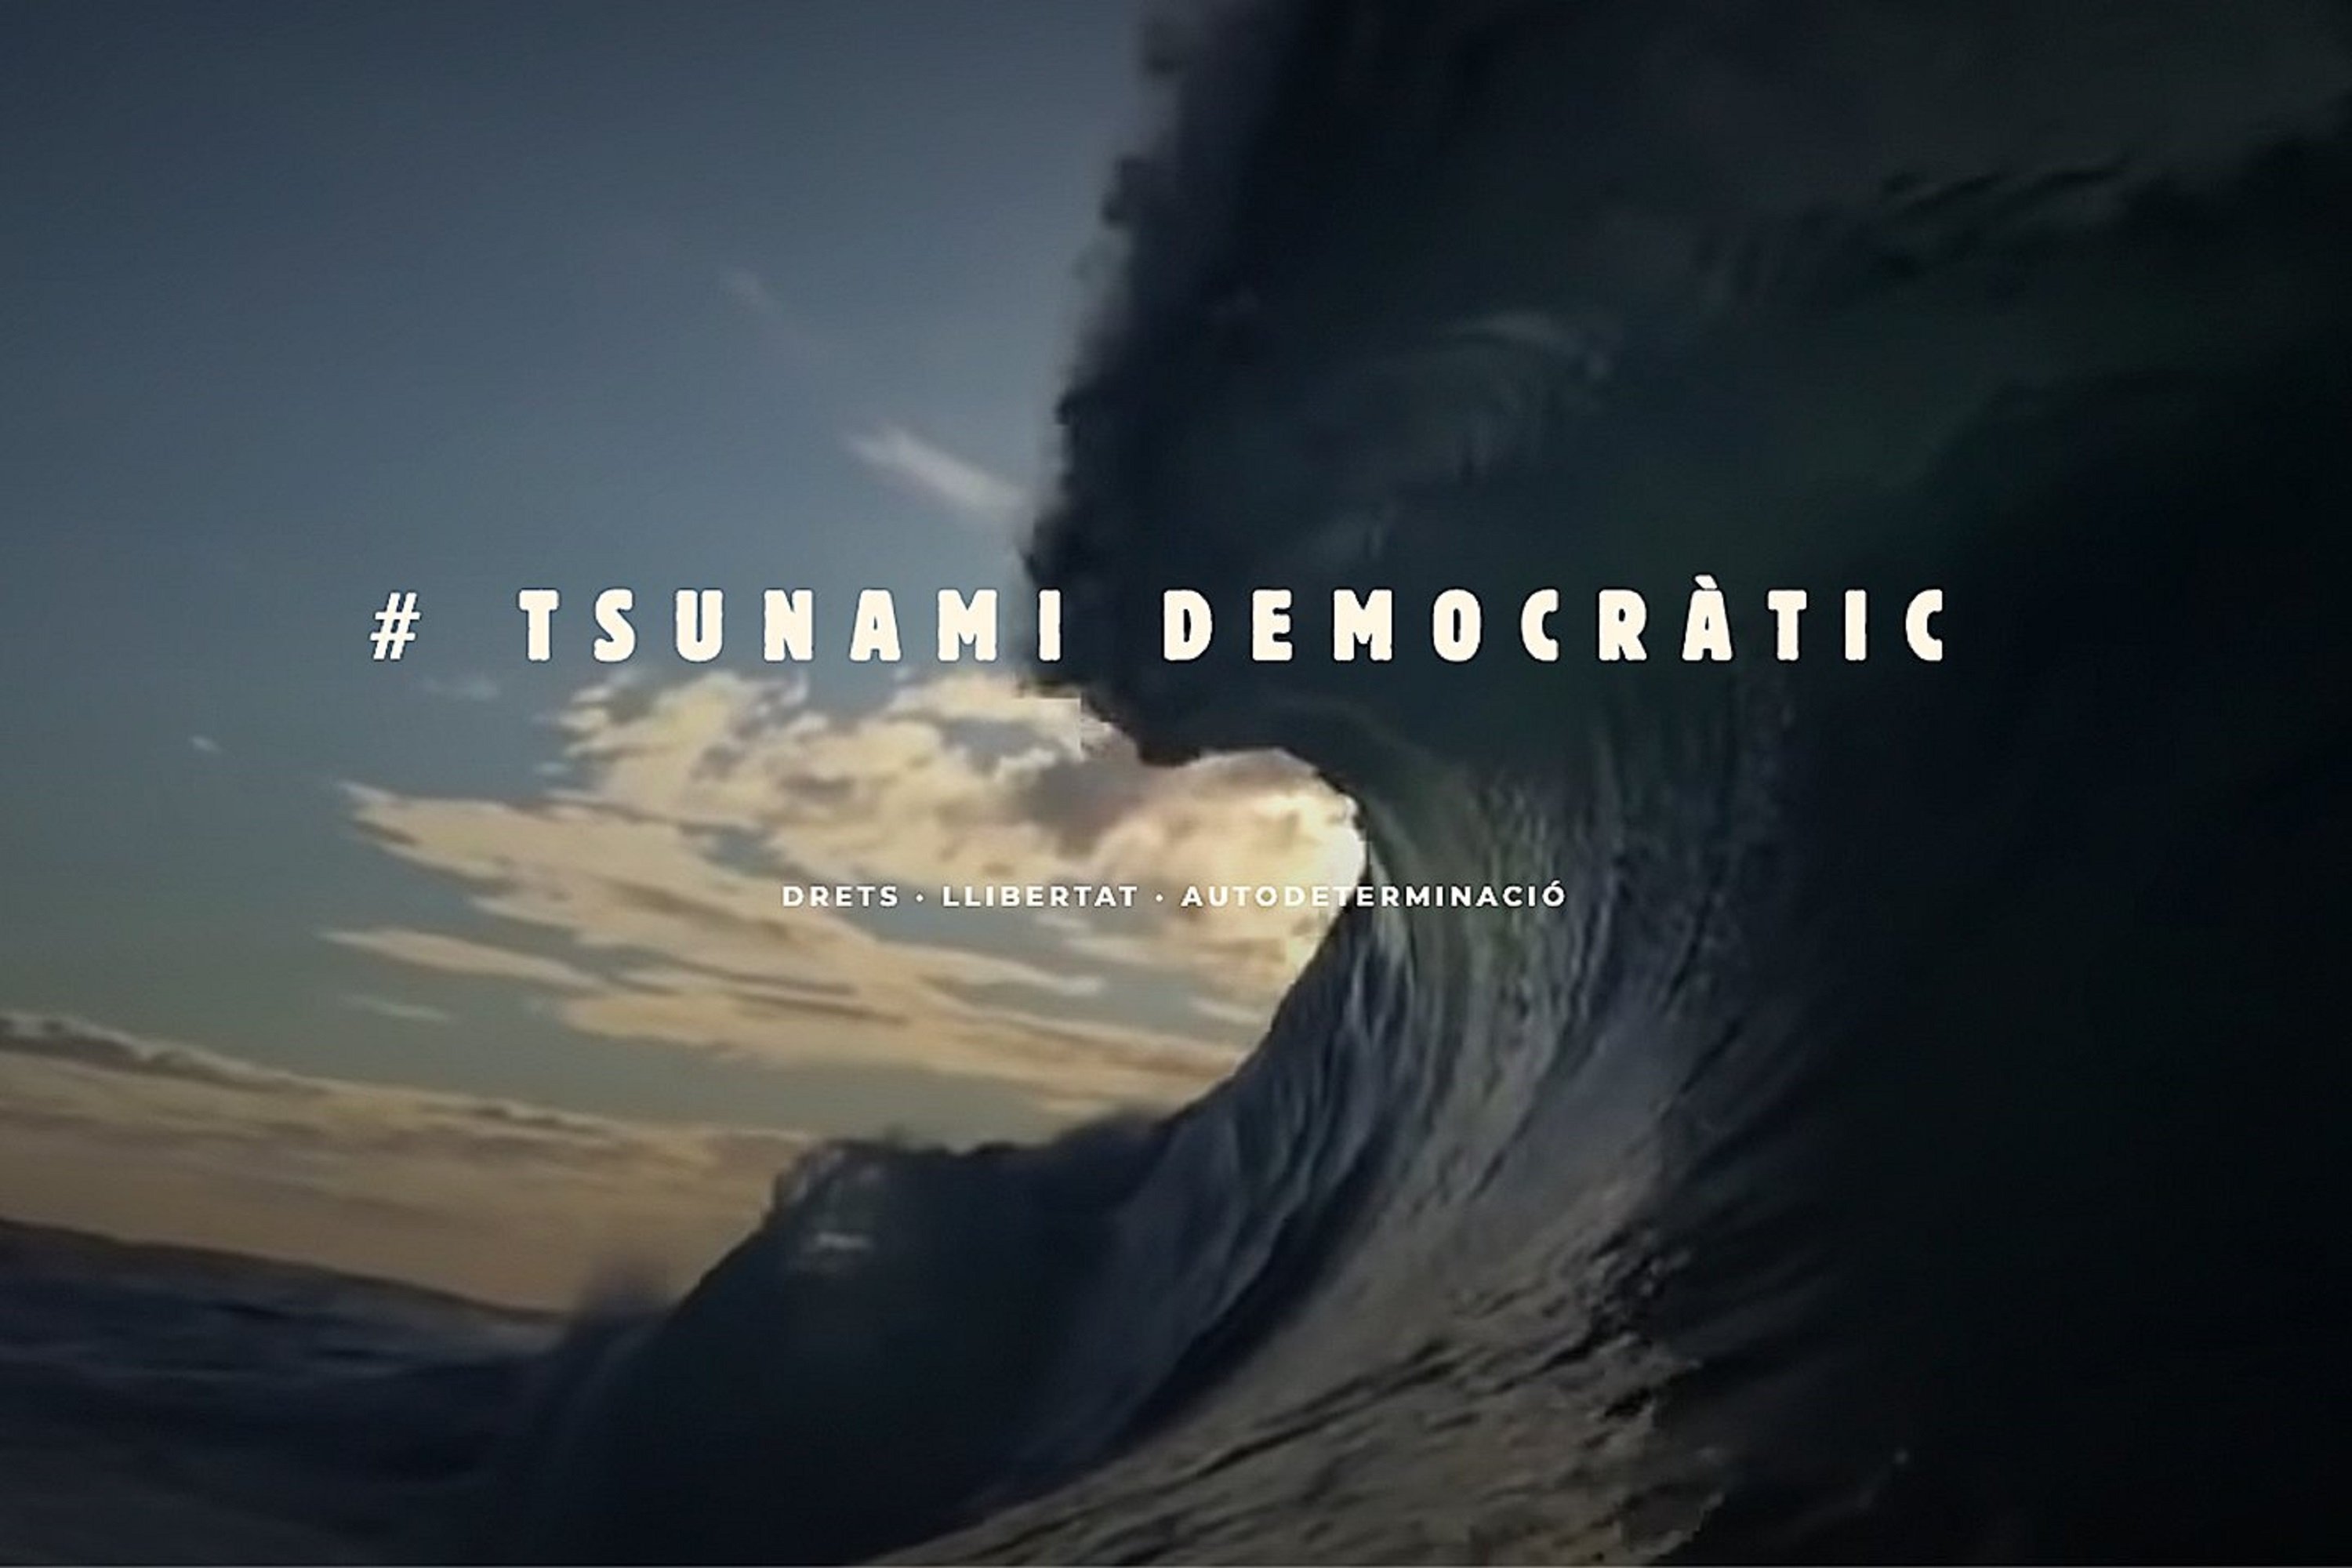 "Democratic Tsunami" to promote non-violent civil disobedience in response to independence trial